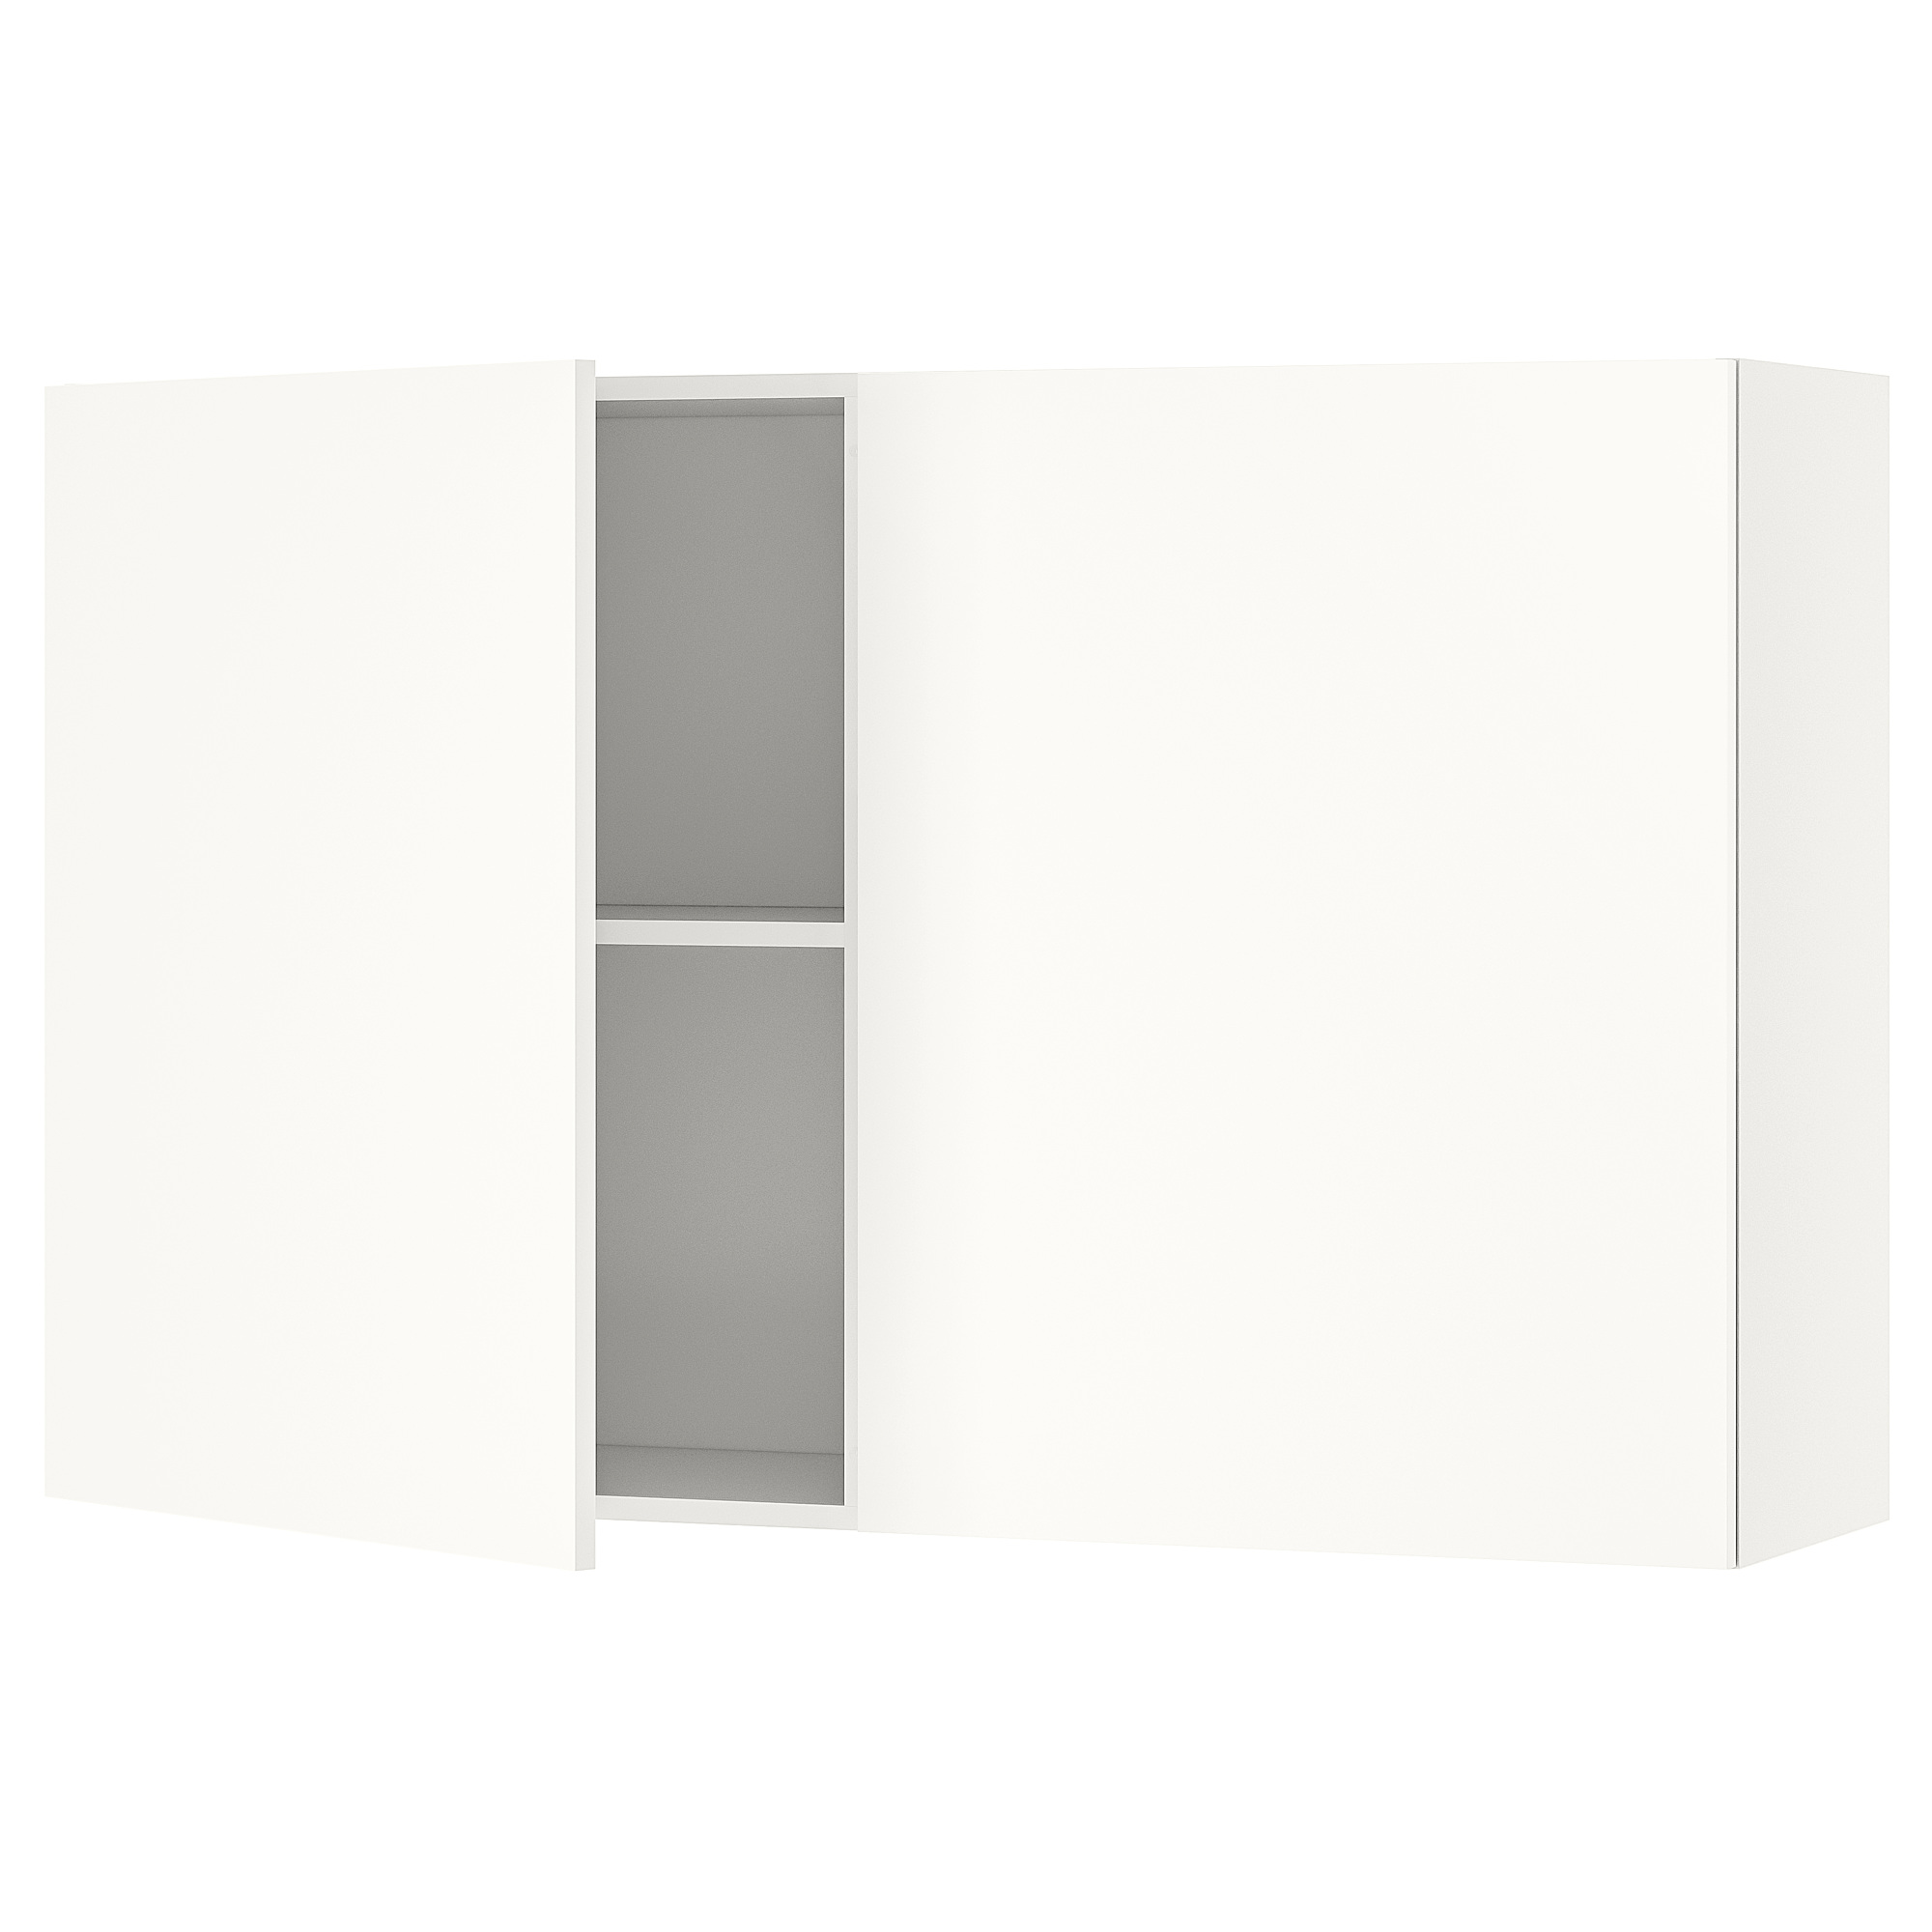 KNOXHULT wall cabinet with doors